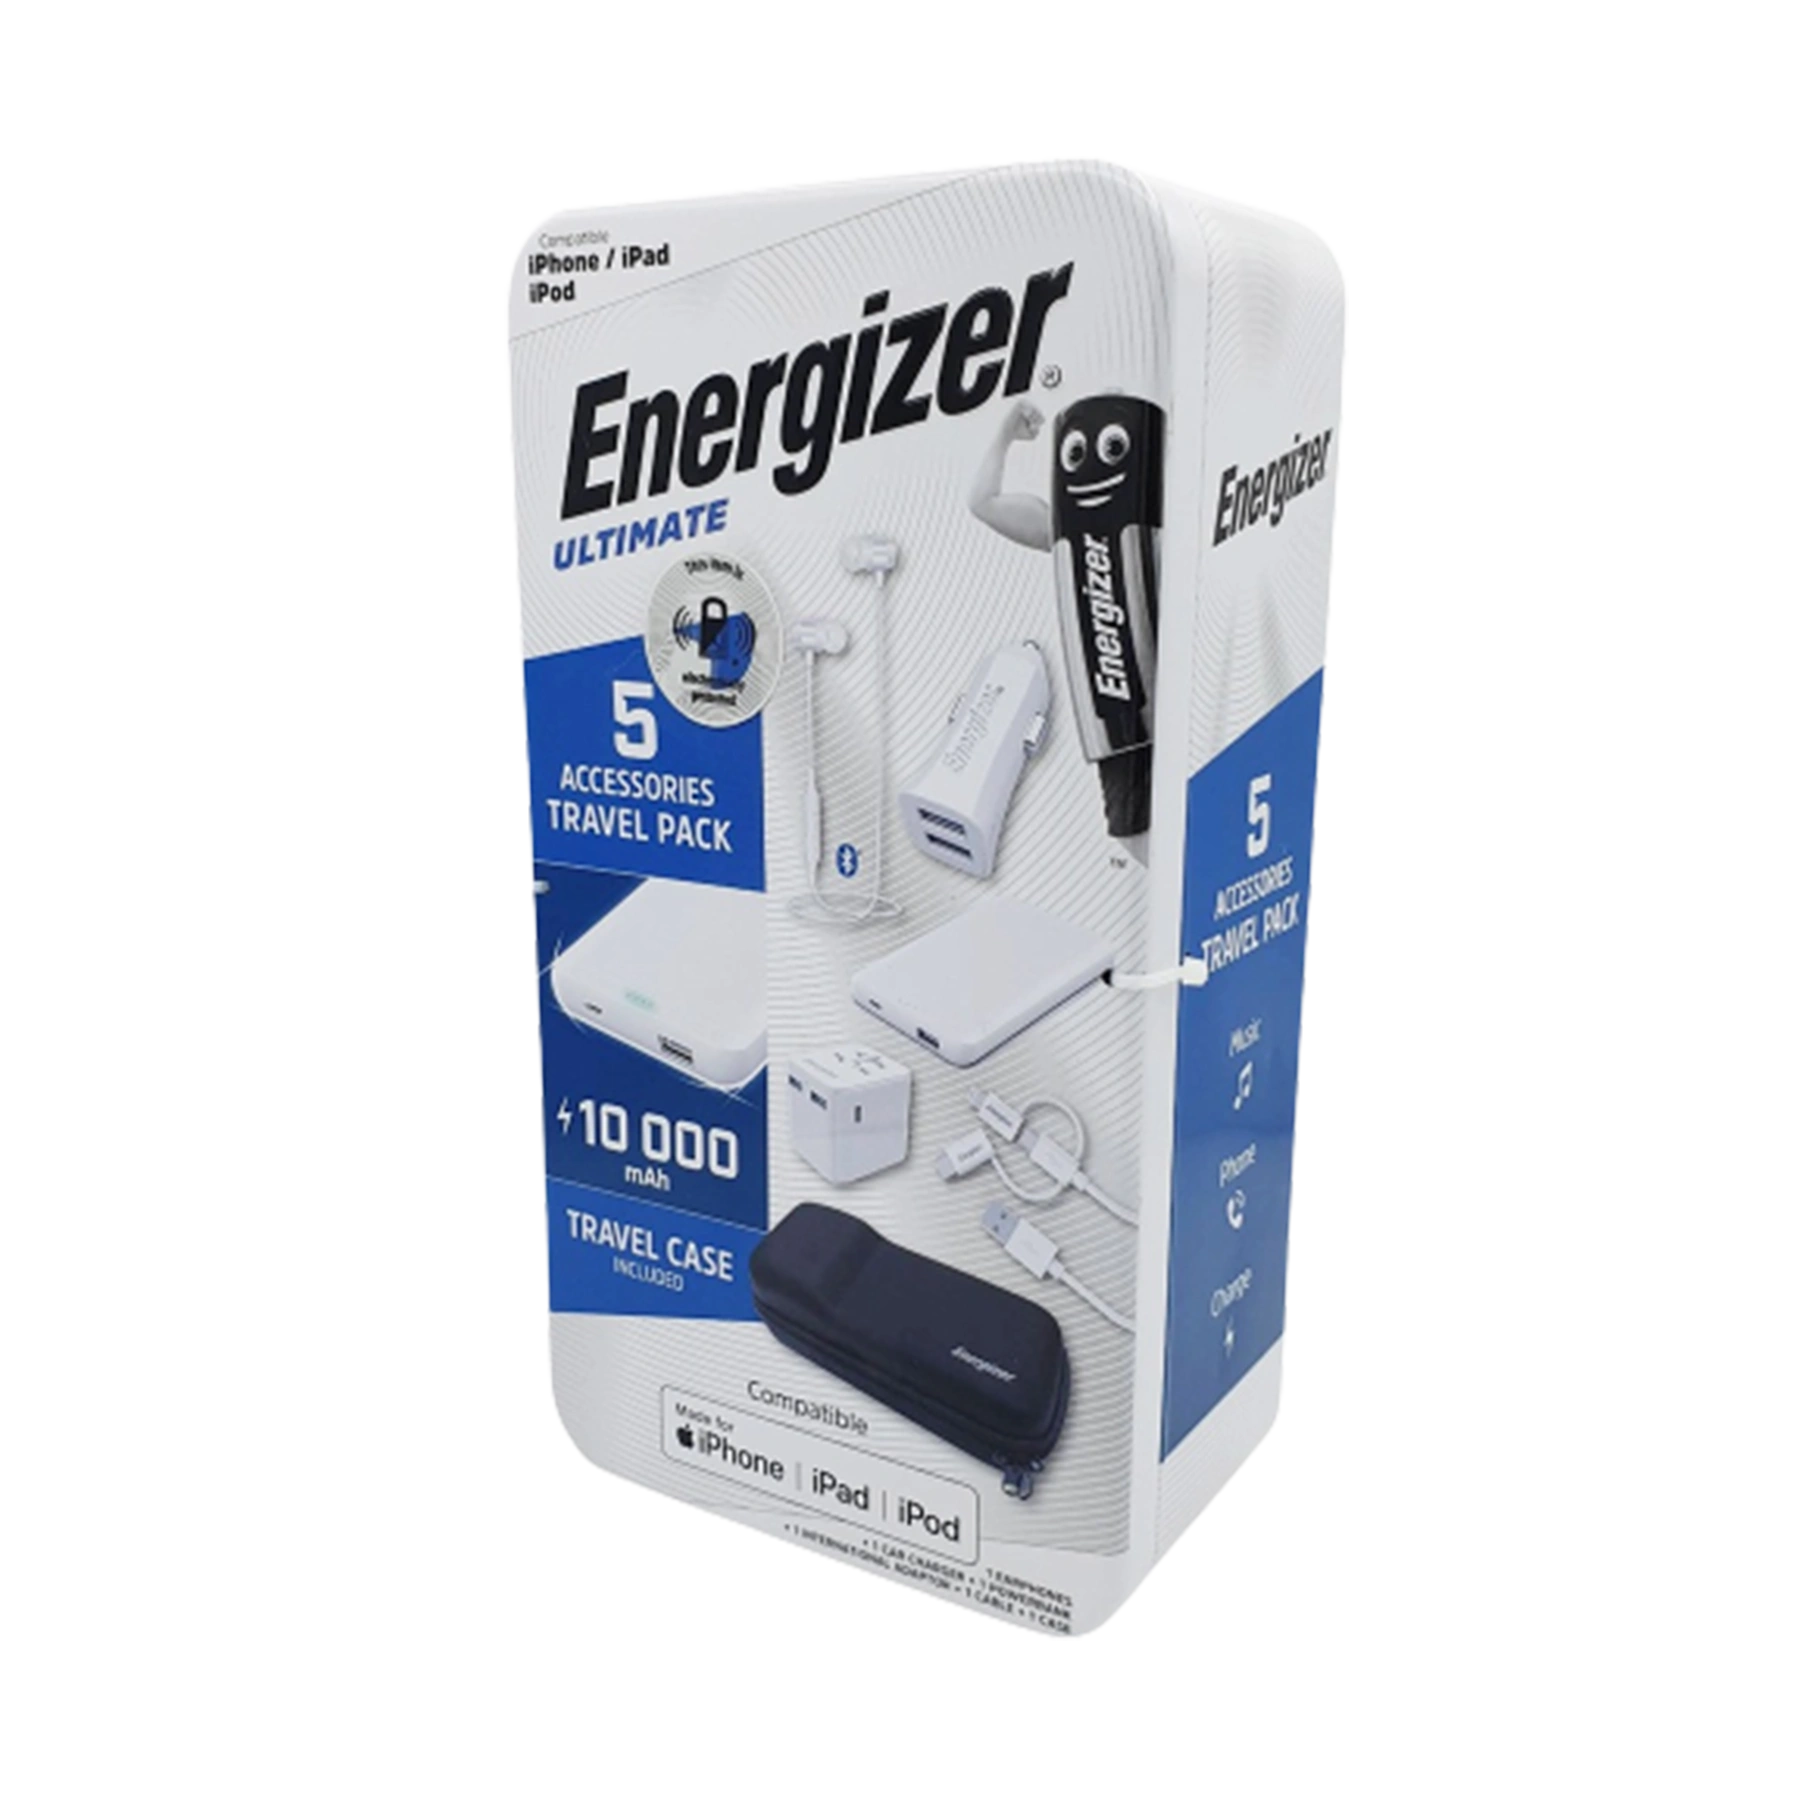 Energizer 5-in-1Travel Accessories Pack Tpandroid